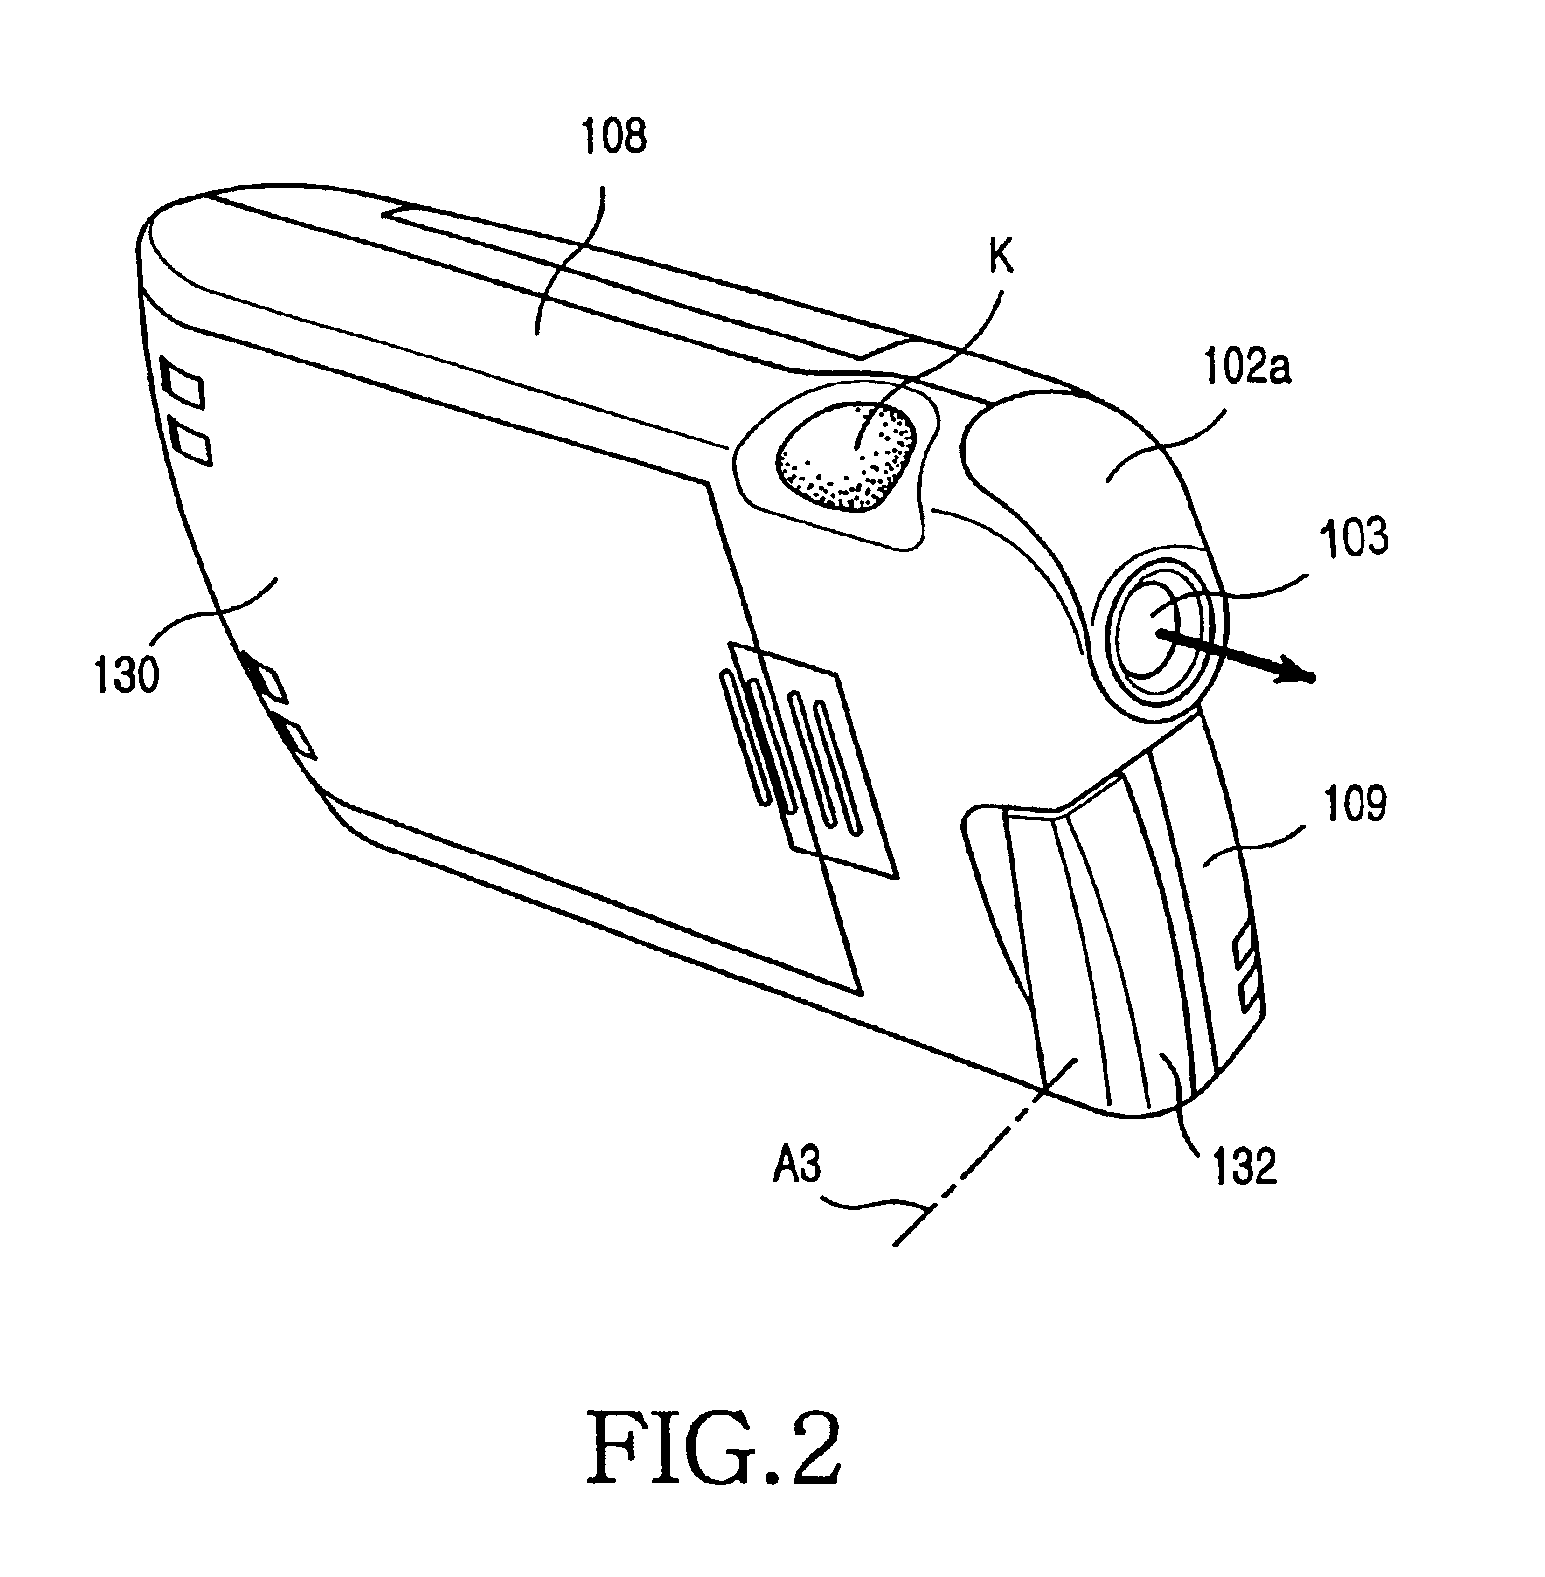 Portable communication apparatus with digital camera and personal digital assistant